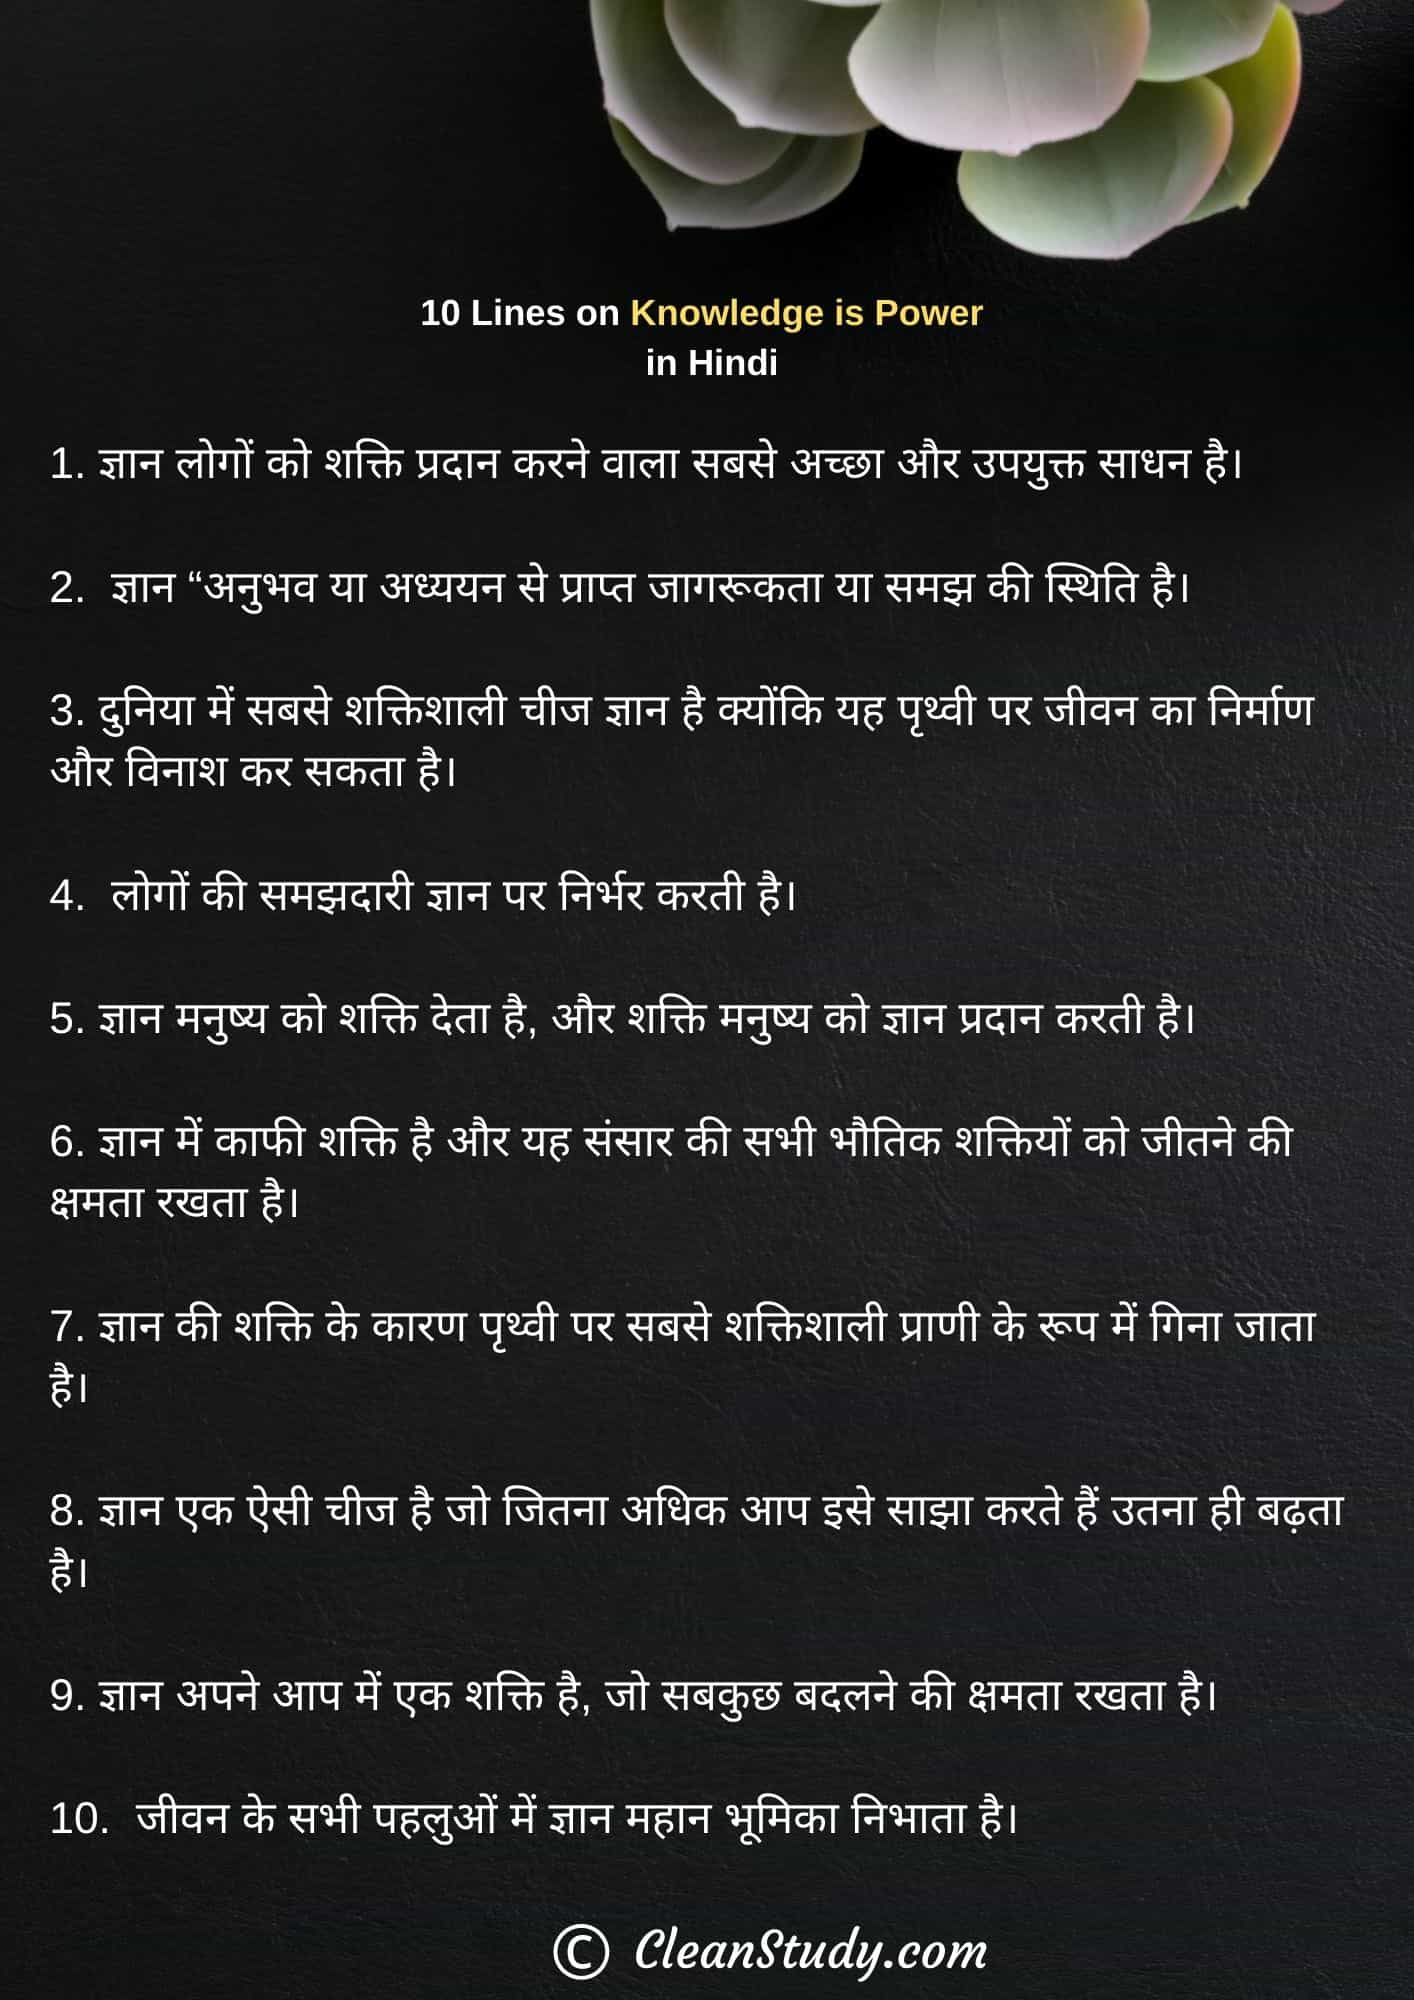 10 Lines on Knowledge is Power in Hindi